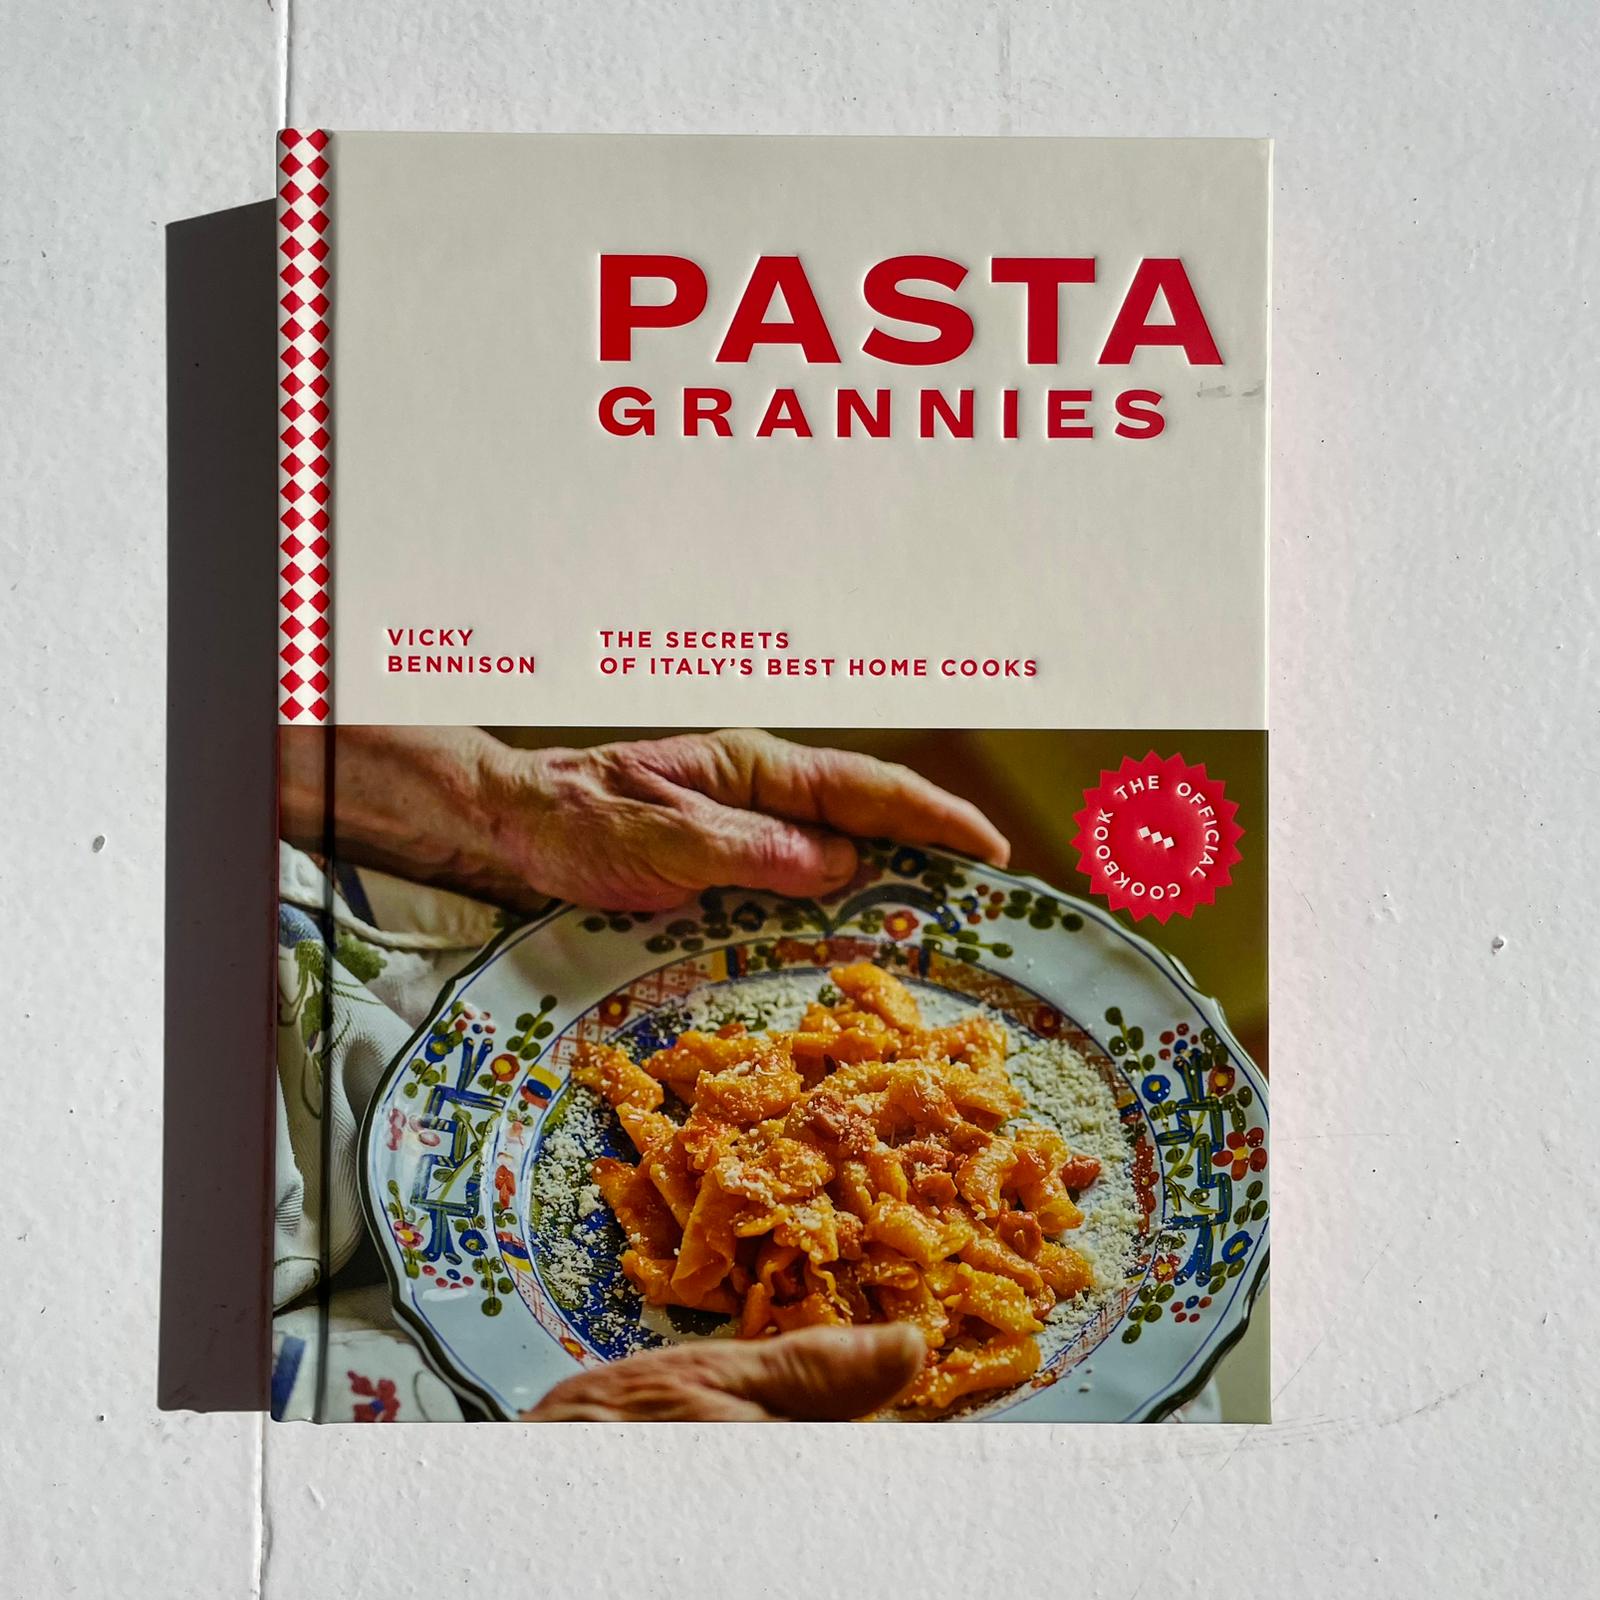 PASTA GRANNIES: THE SECRETS OF ITALY'S BEST HOME COOKS